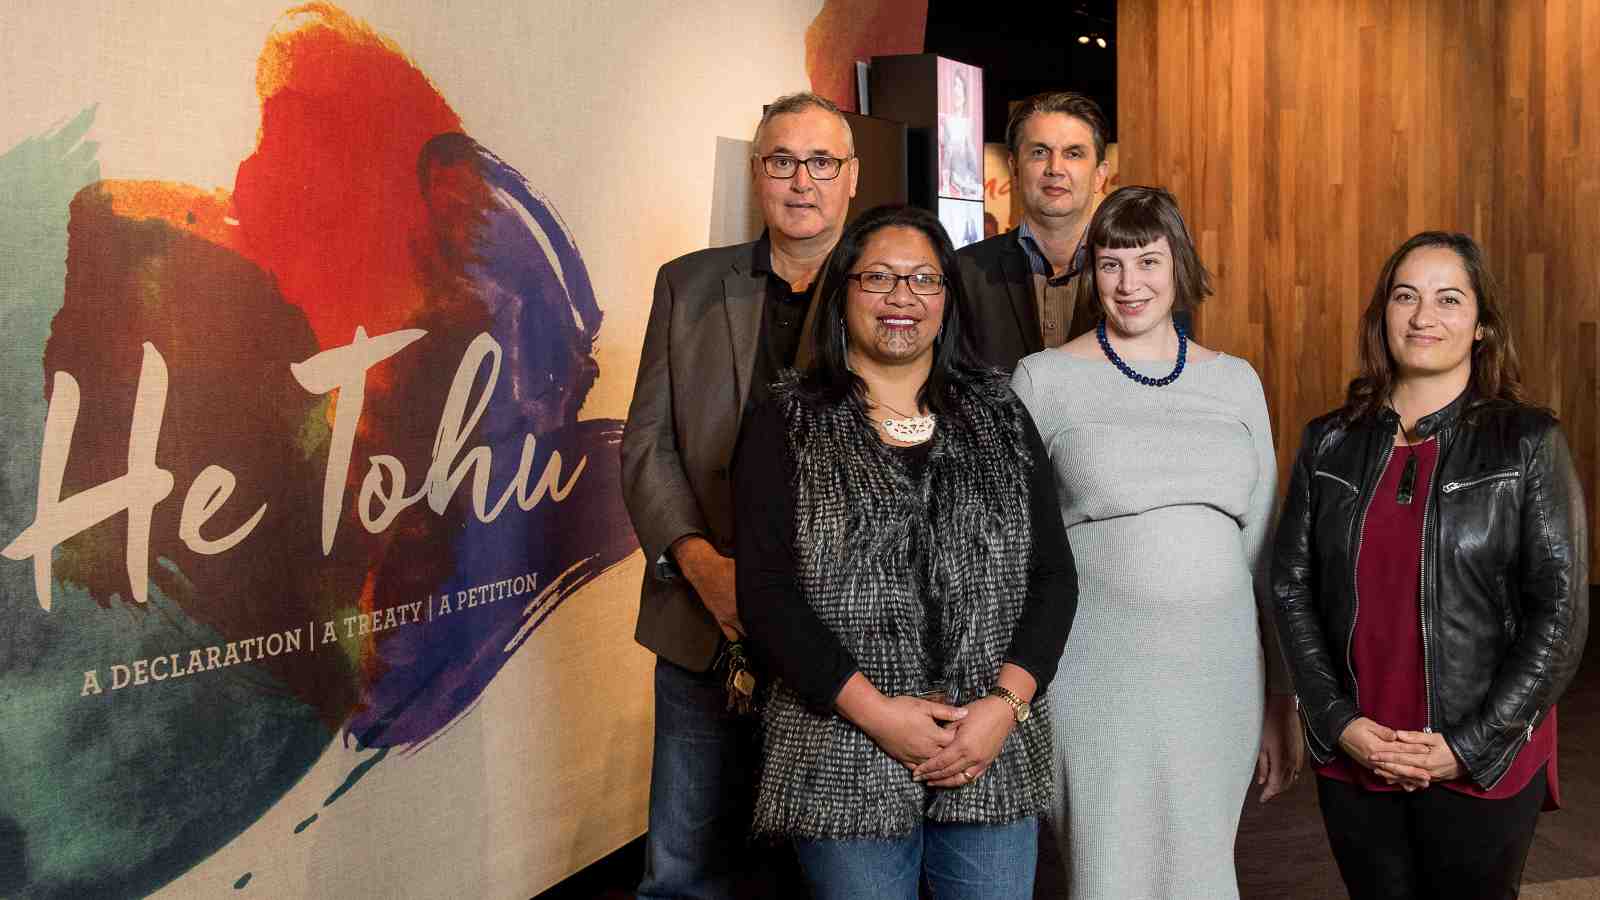 Victoria University staff stand in front of the He Tohu exhibition sign.